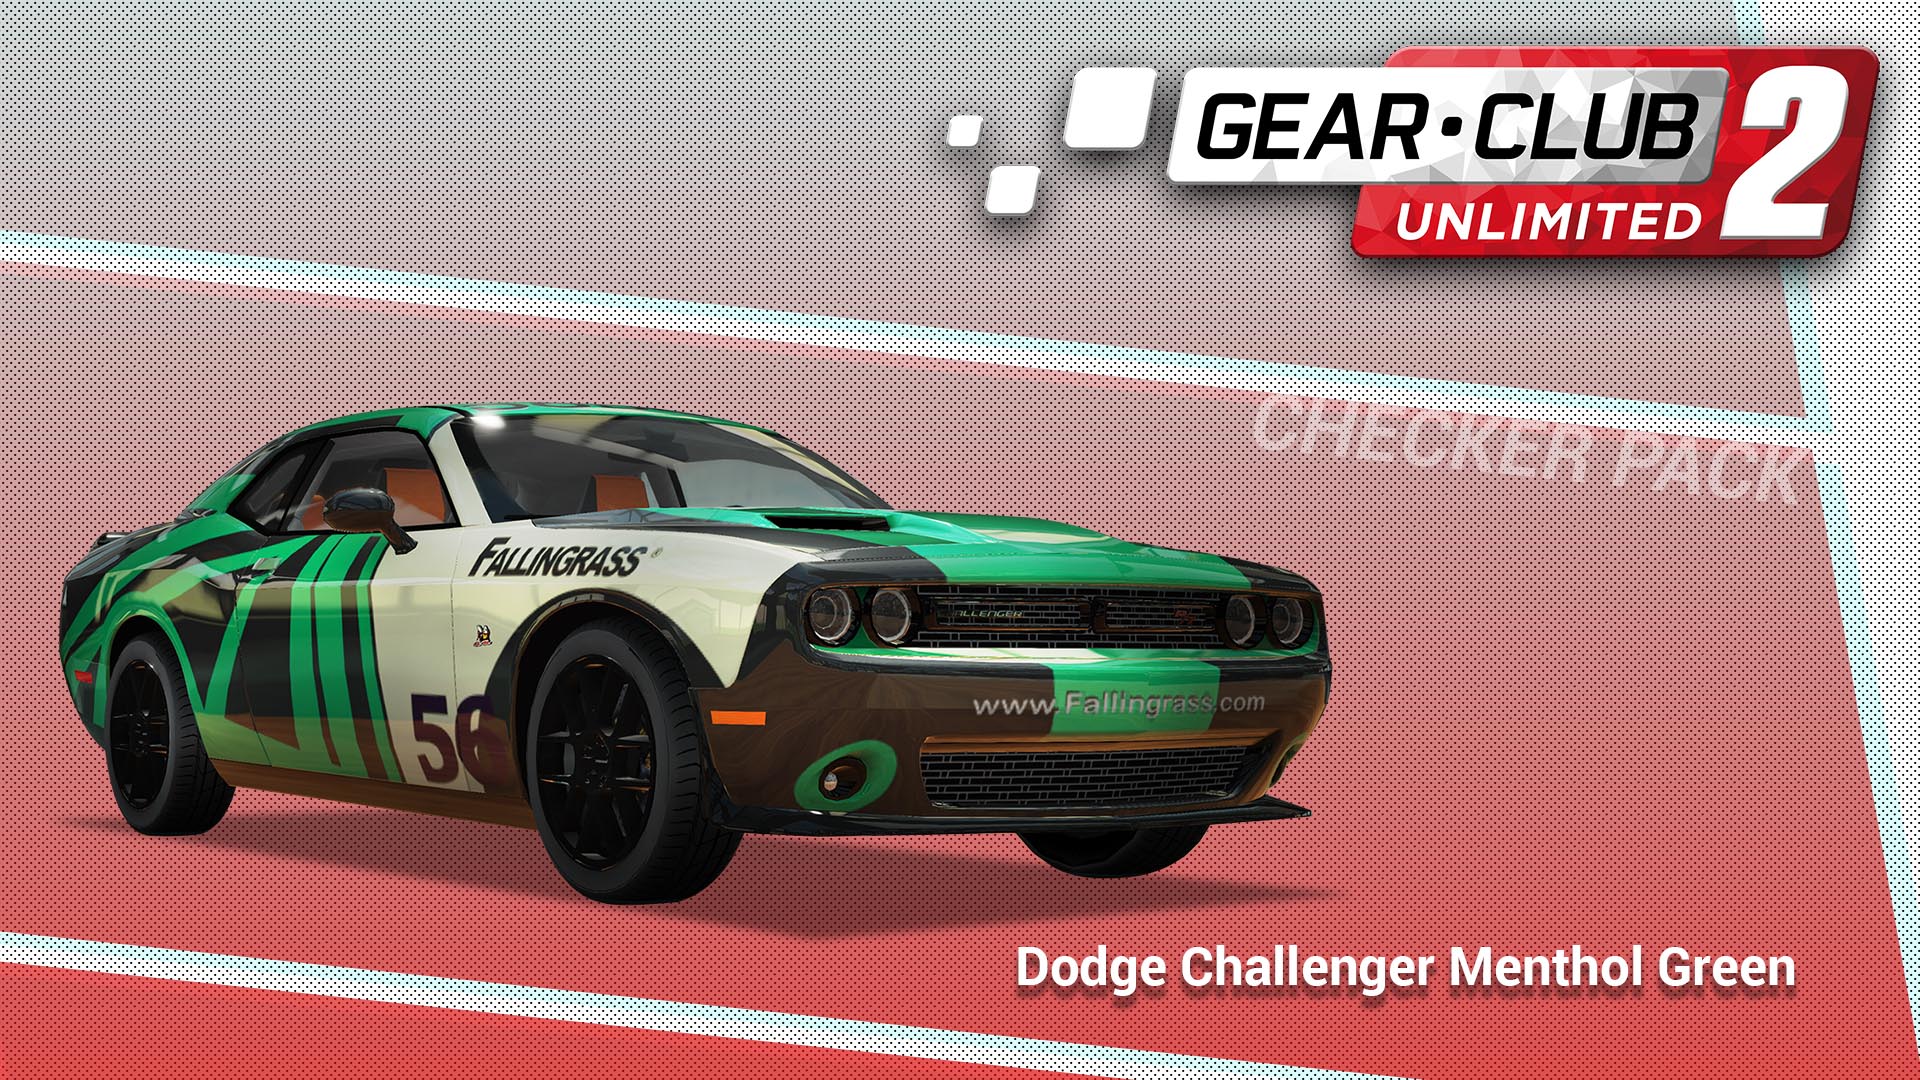 Dodge Challenger Menthol Green - Gear.Club Unlimited 2